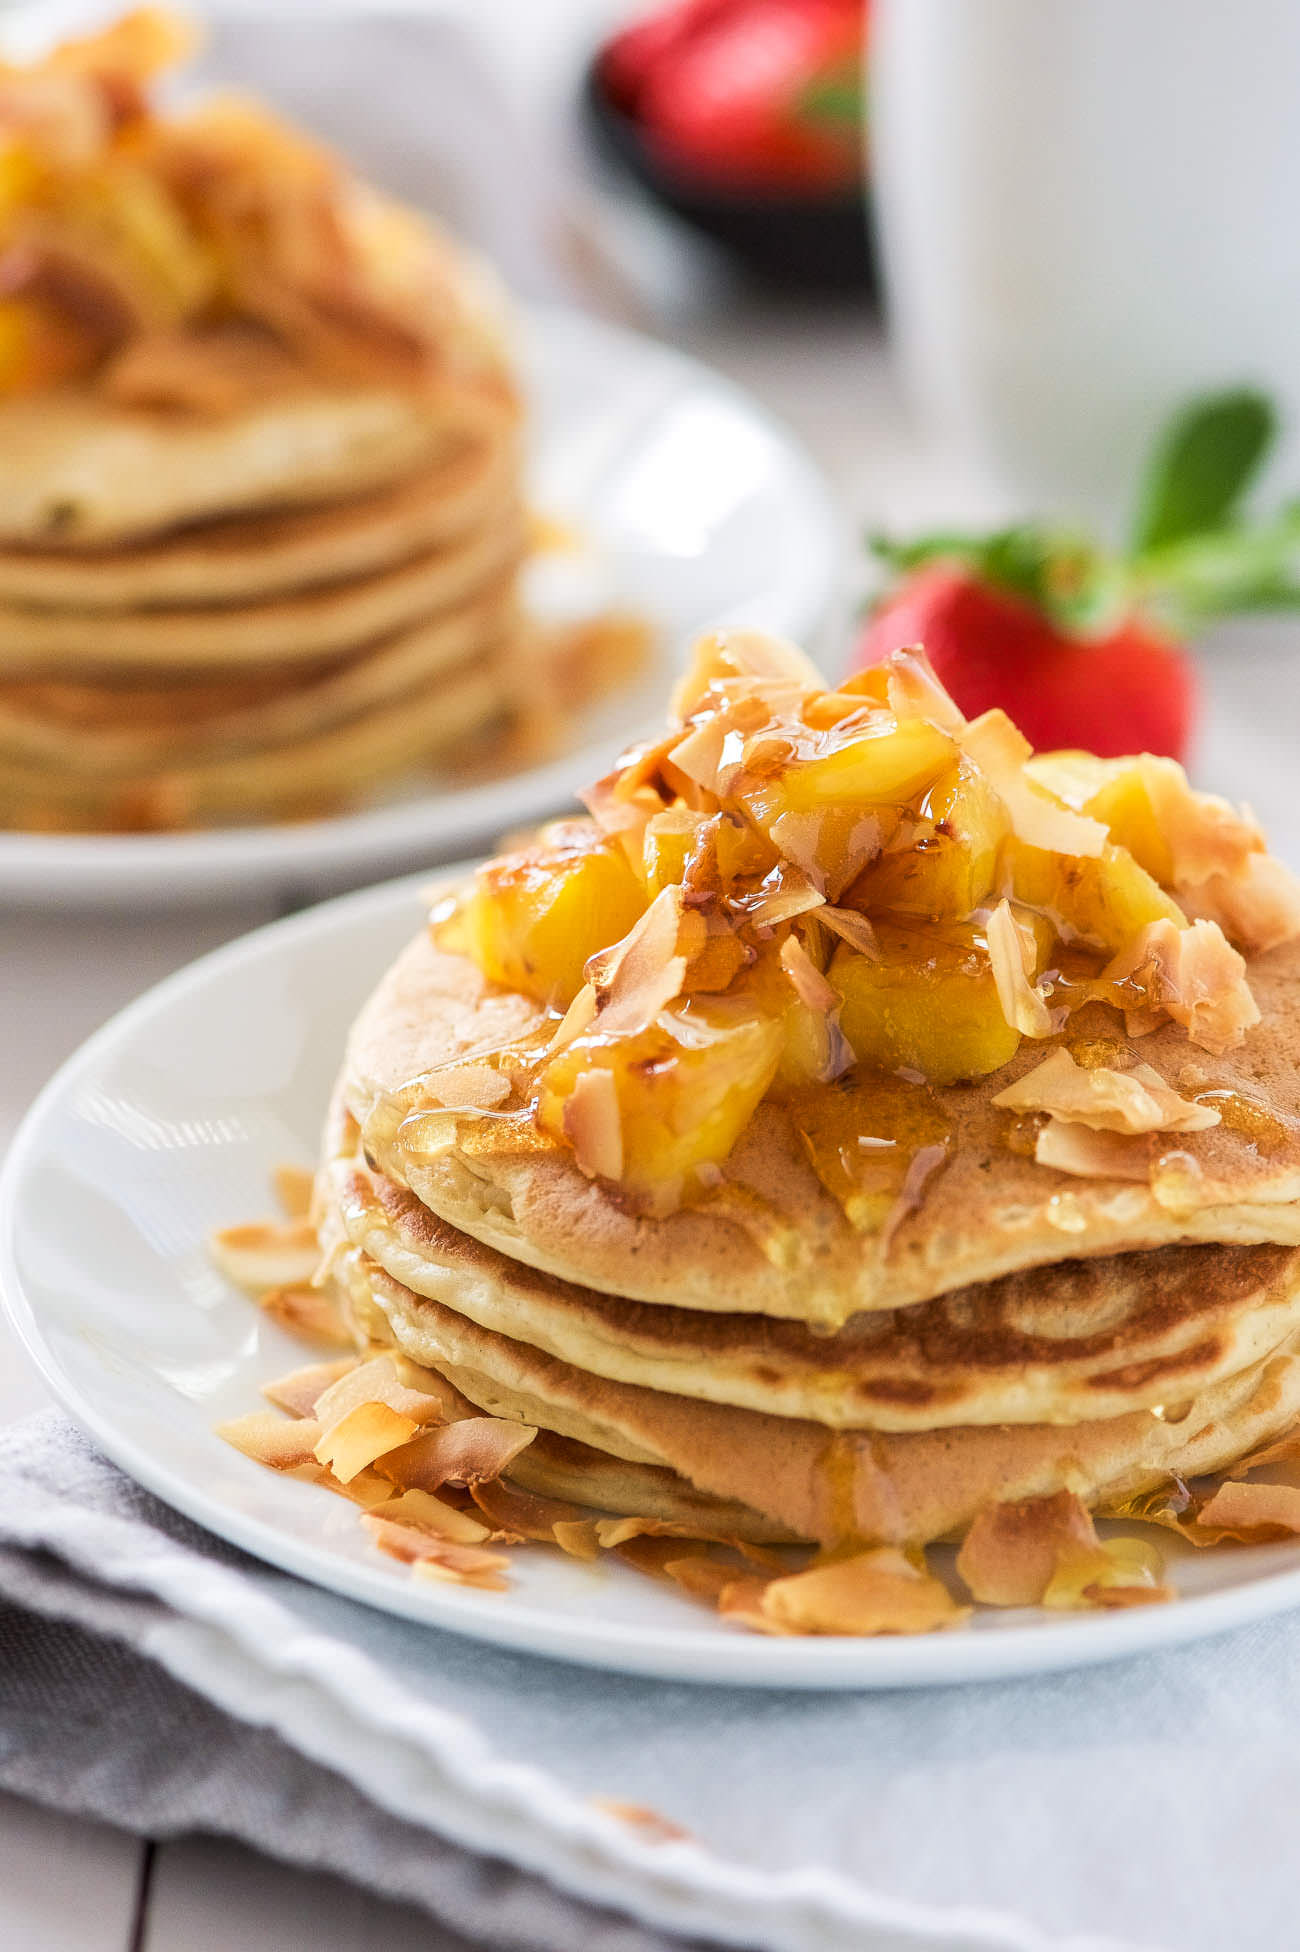 These Honey Pineapple and Toasted Coconut Pancakes are light, fluffy and filled with tropical flavors! These pancakes are the perfect start to a weekend breakfast or brunch!